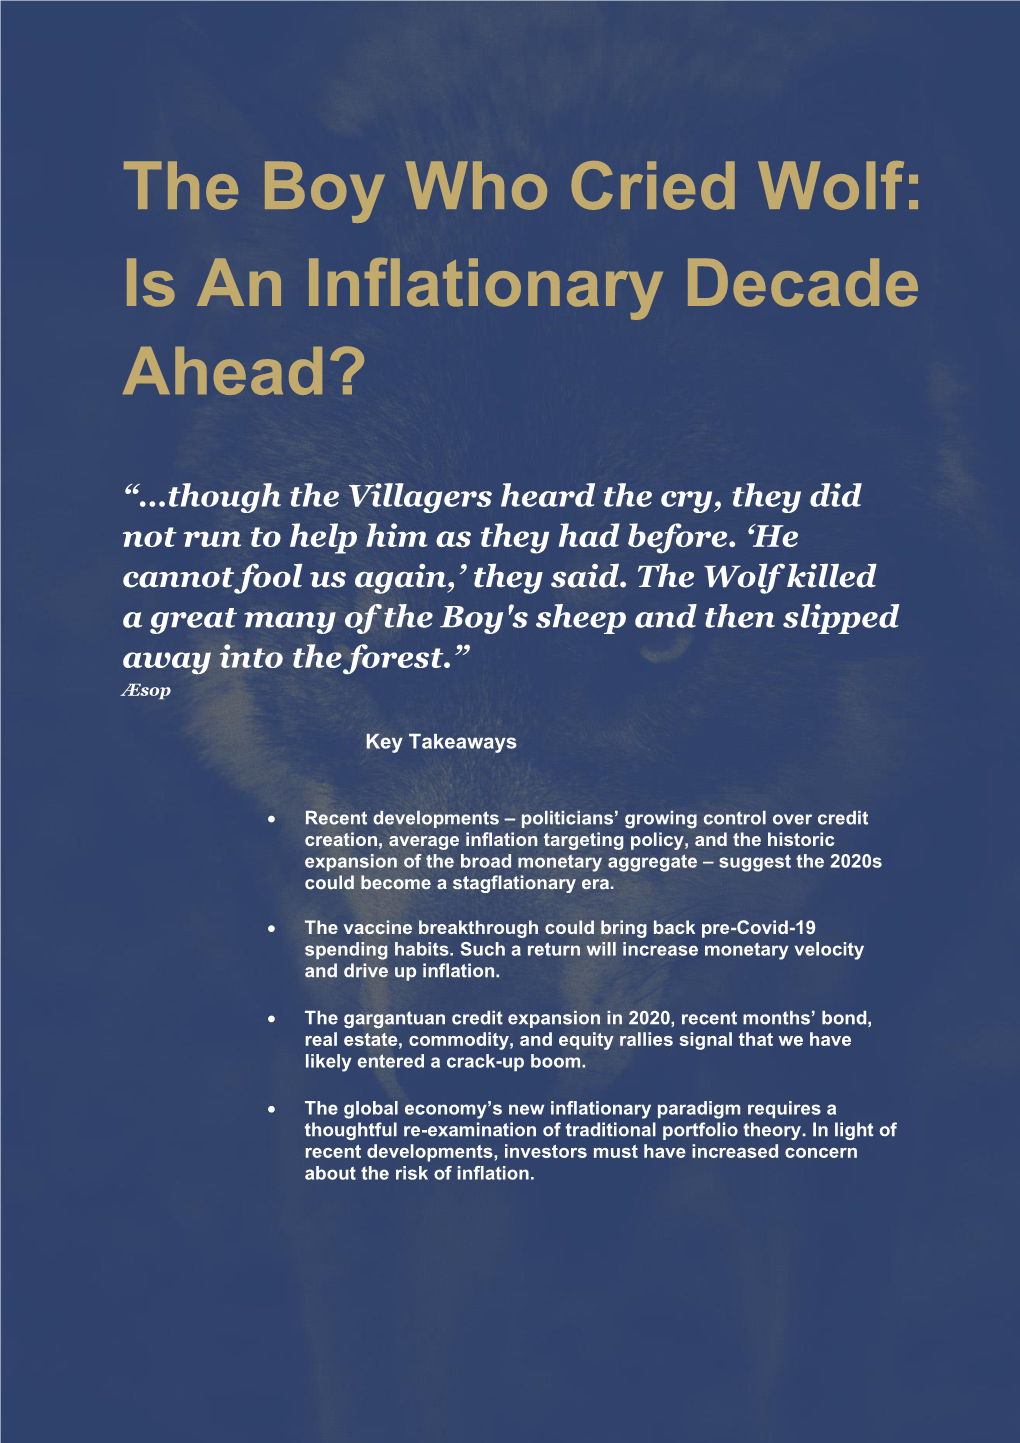 The Boy Who Cried Wolf: Is an Inflationary Decade Ahead?